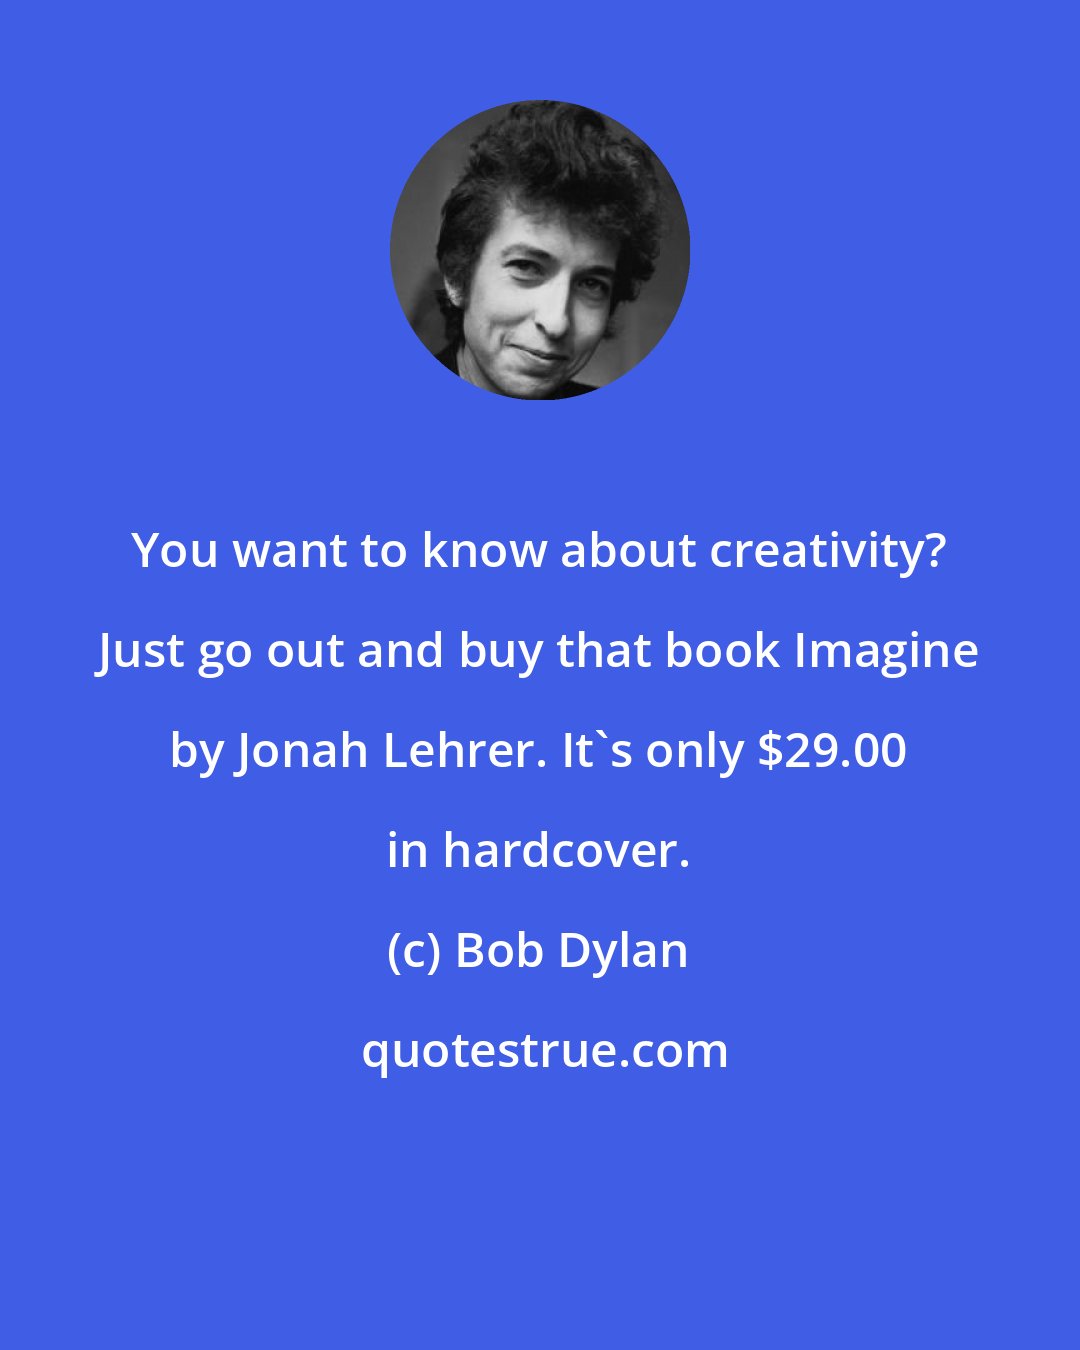 Bob Dylan: You want to know about creativity? Just go out and buy that book Imagine by Jonah Lehrer. It's only $29.00 in hardcover.